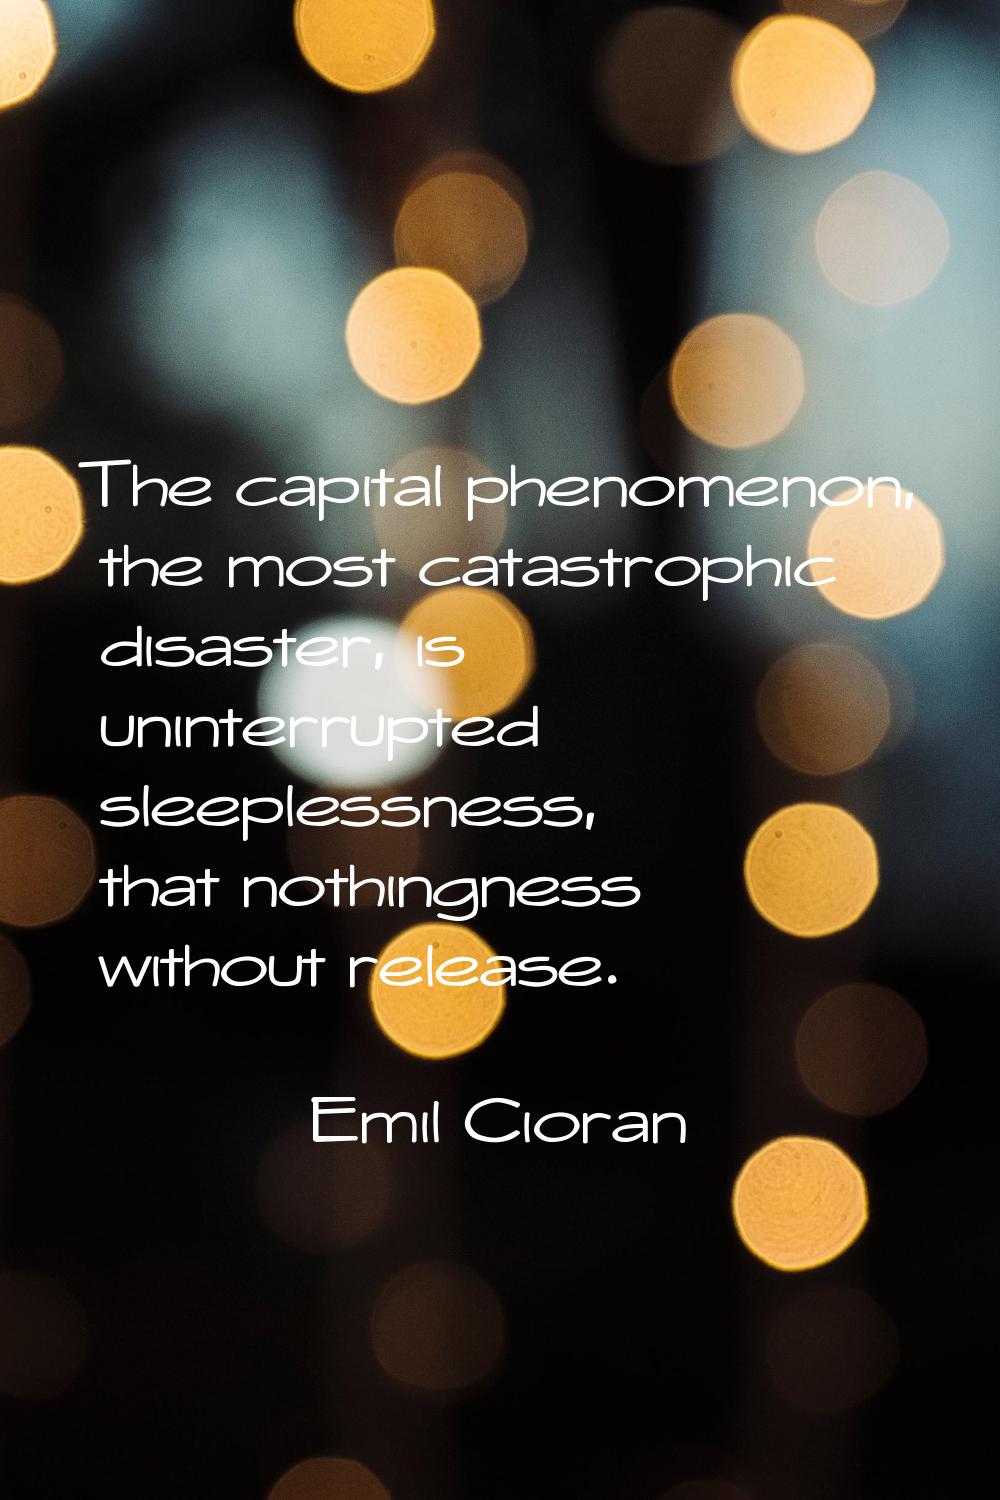 The capital phenomenon, the most catastrophic disaster, is uninterrupted sleeplessness, that nothin